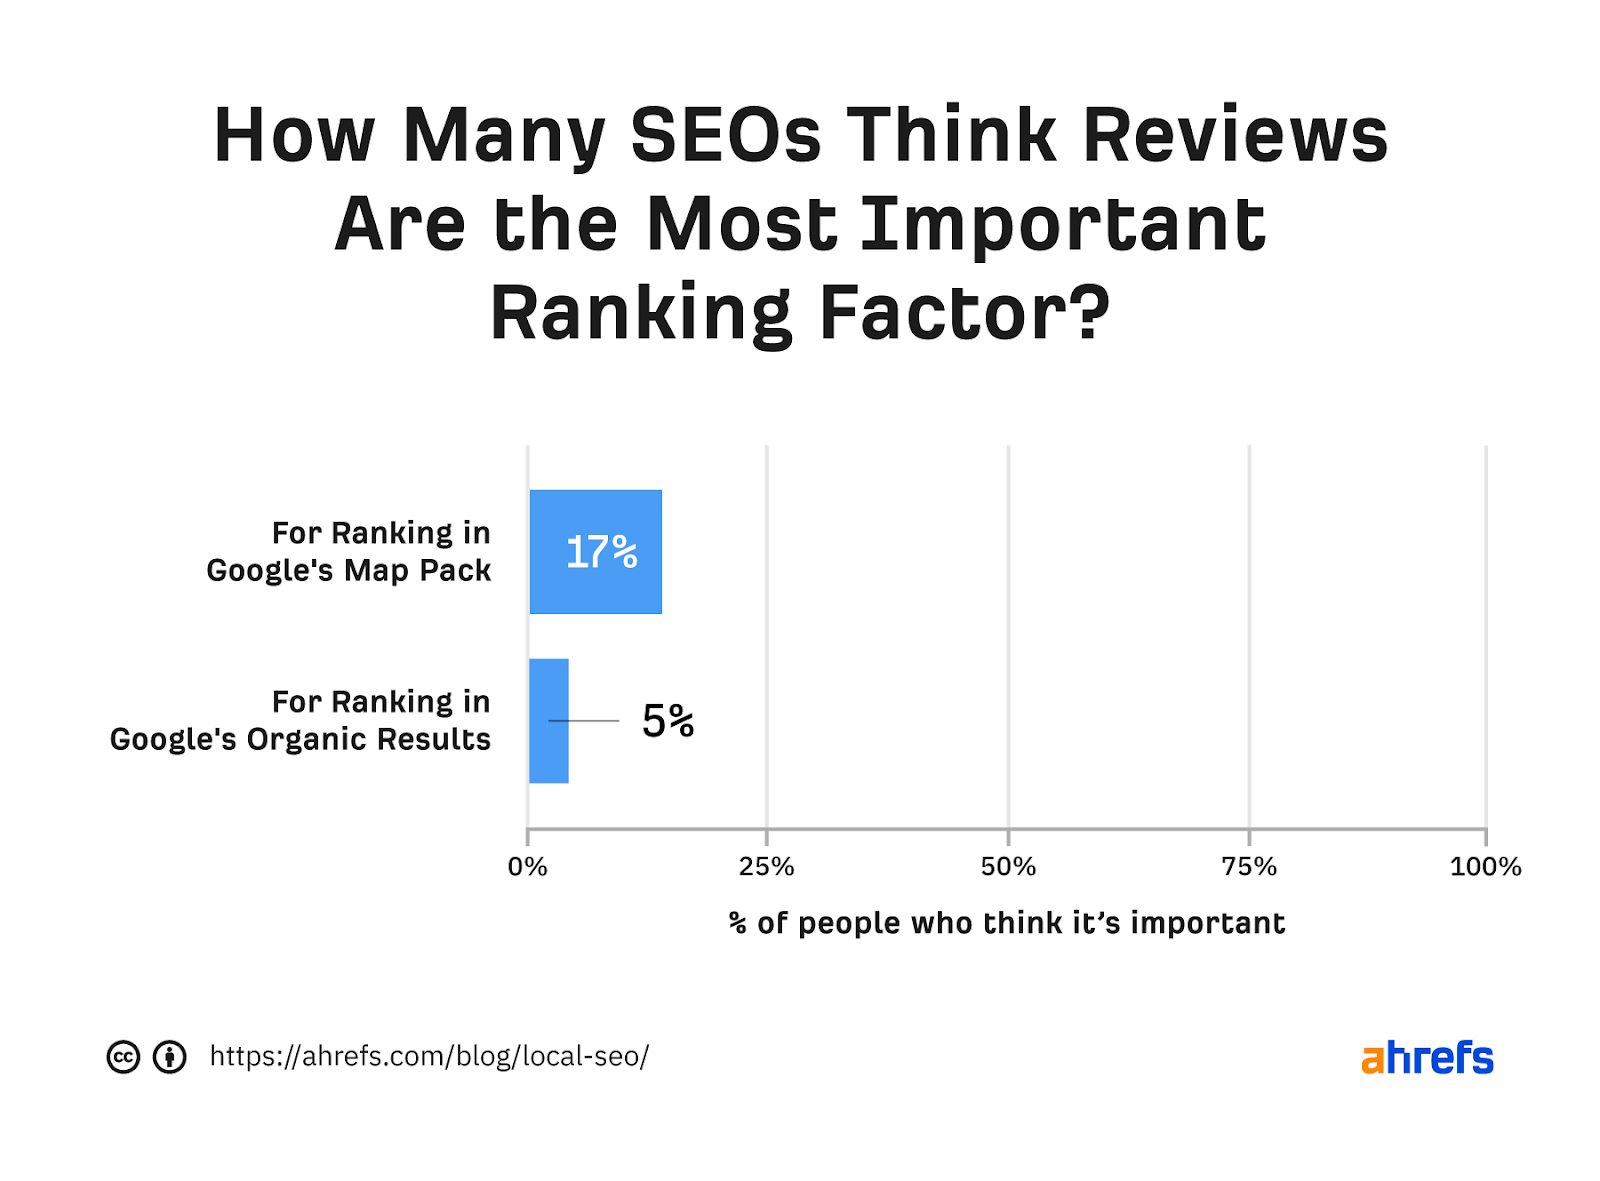 Bar graph showing percentage of SEOs who think reviews are most important ranking factor for 